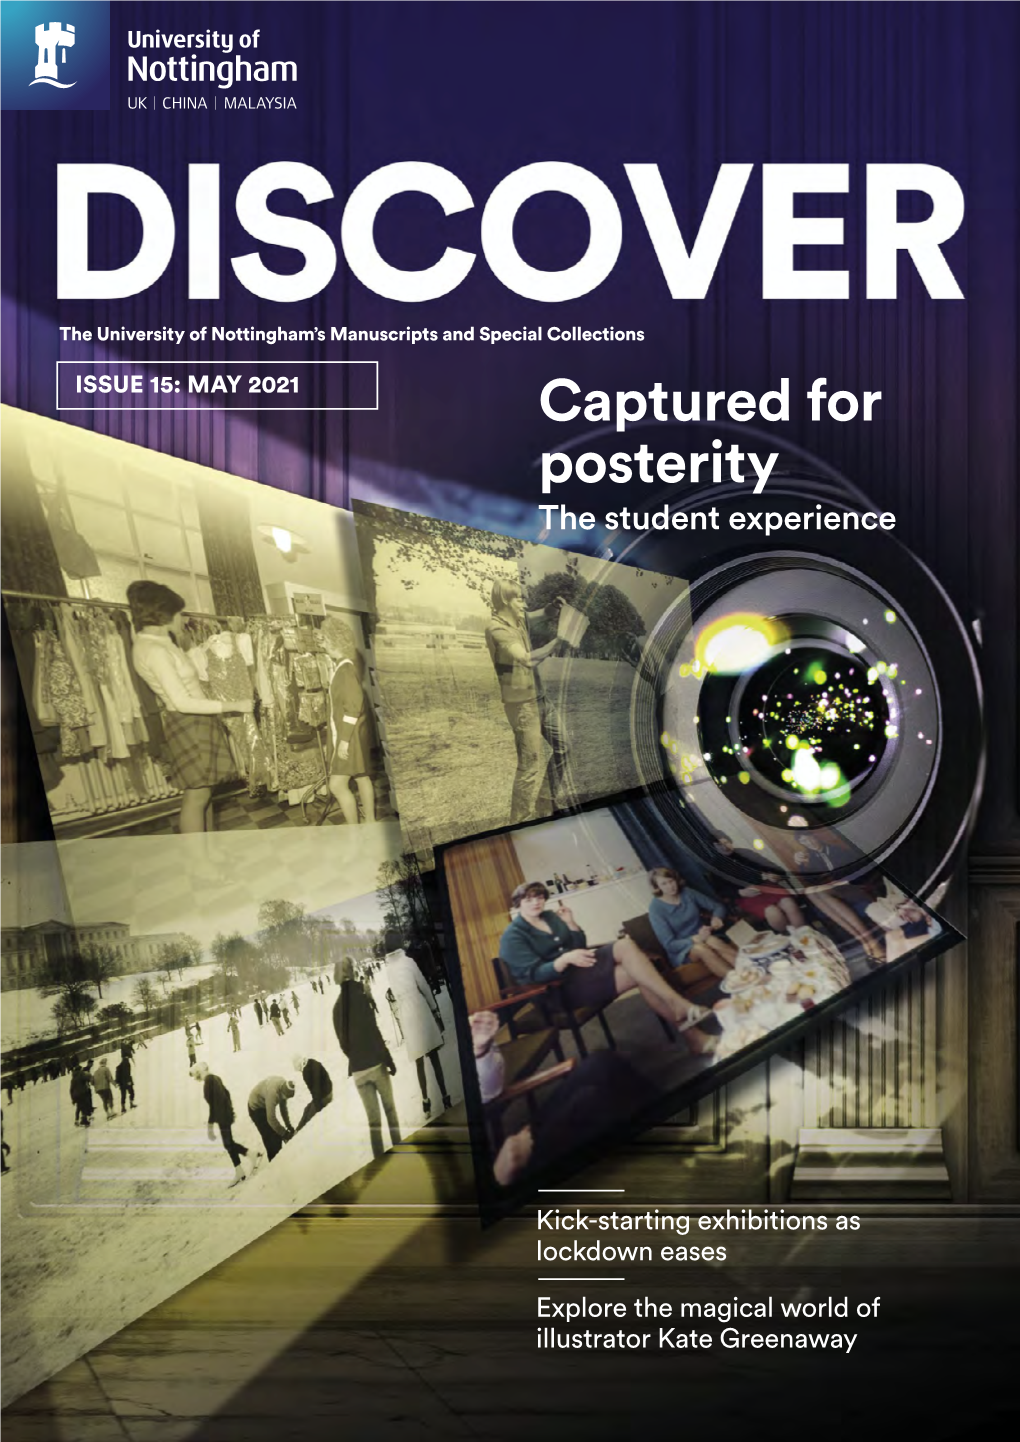 DISCOVER Magazine Edition 15 May 2021